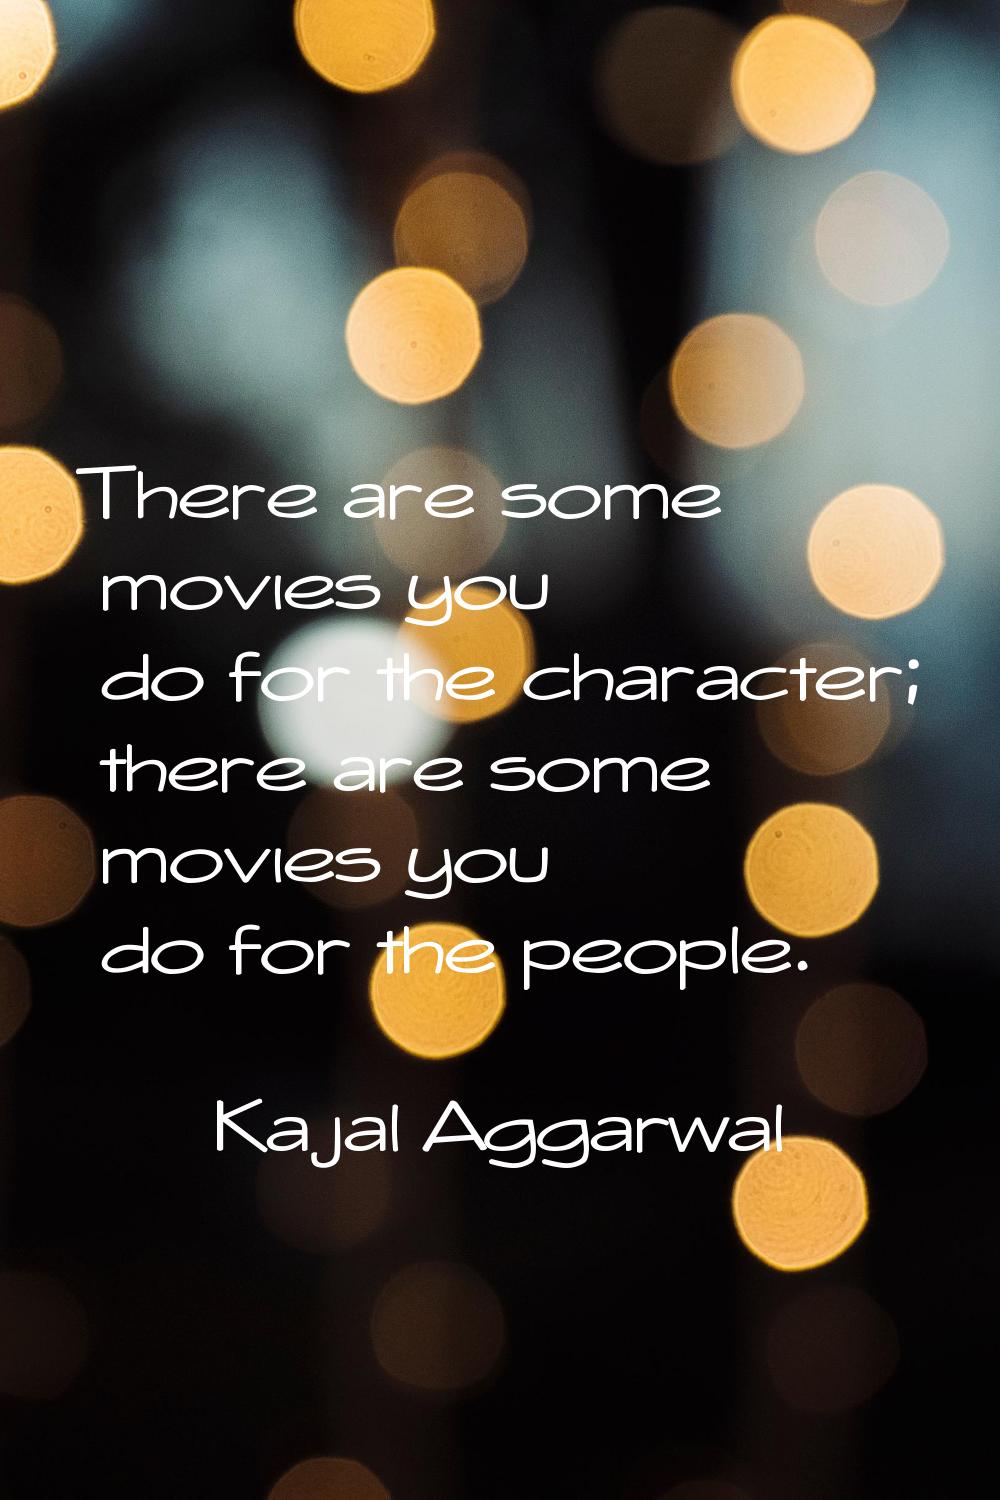 There are some movies you do for the character; there are some movies you do for the people.